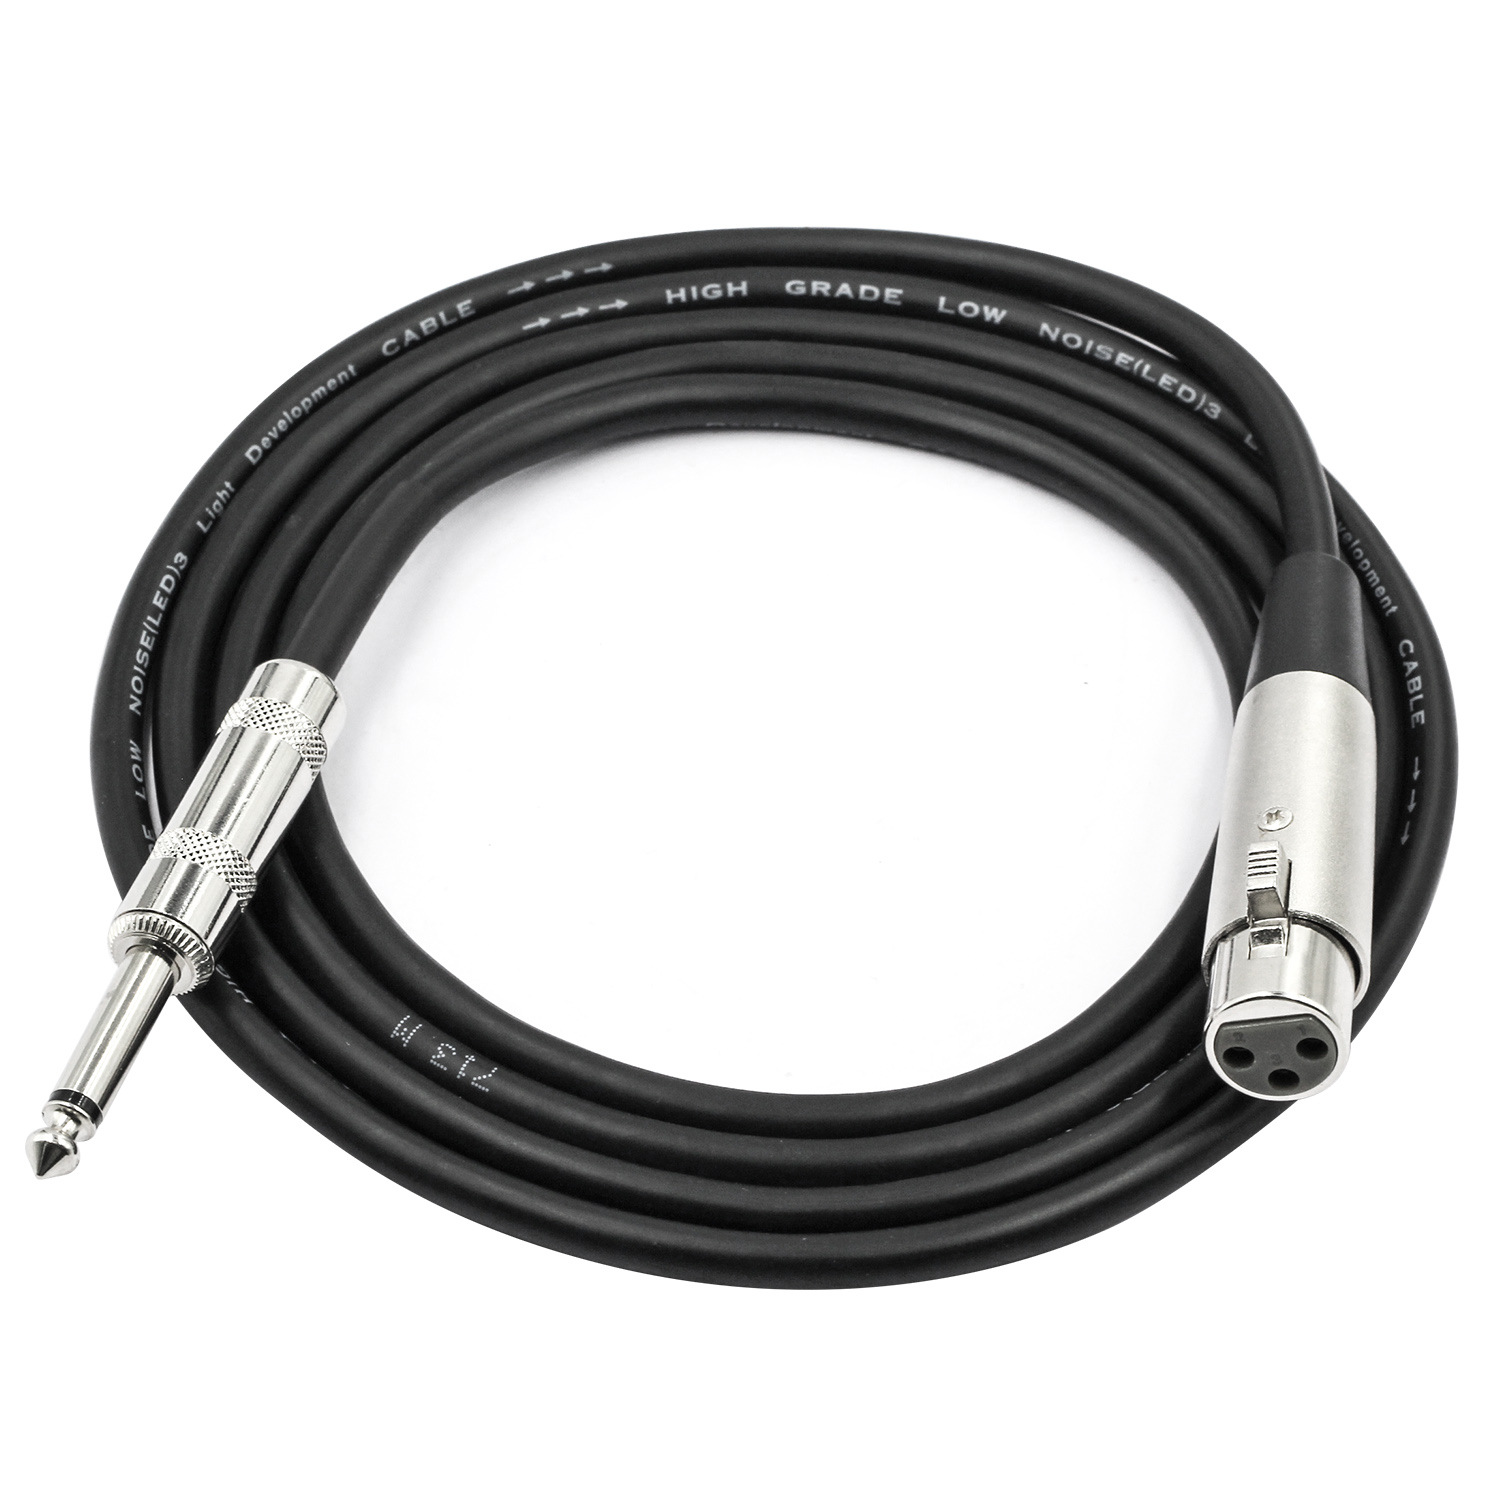 6.35mm male to XLR Female audio cable